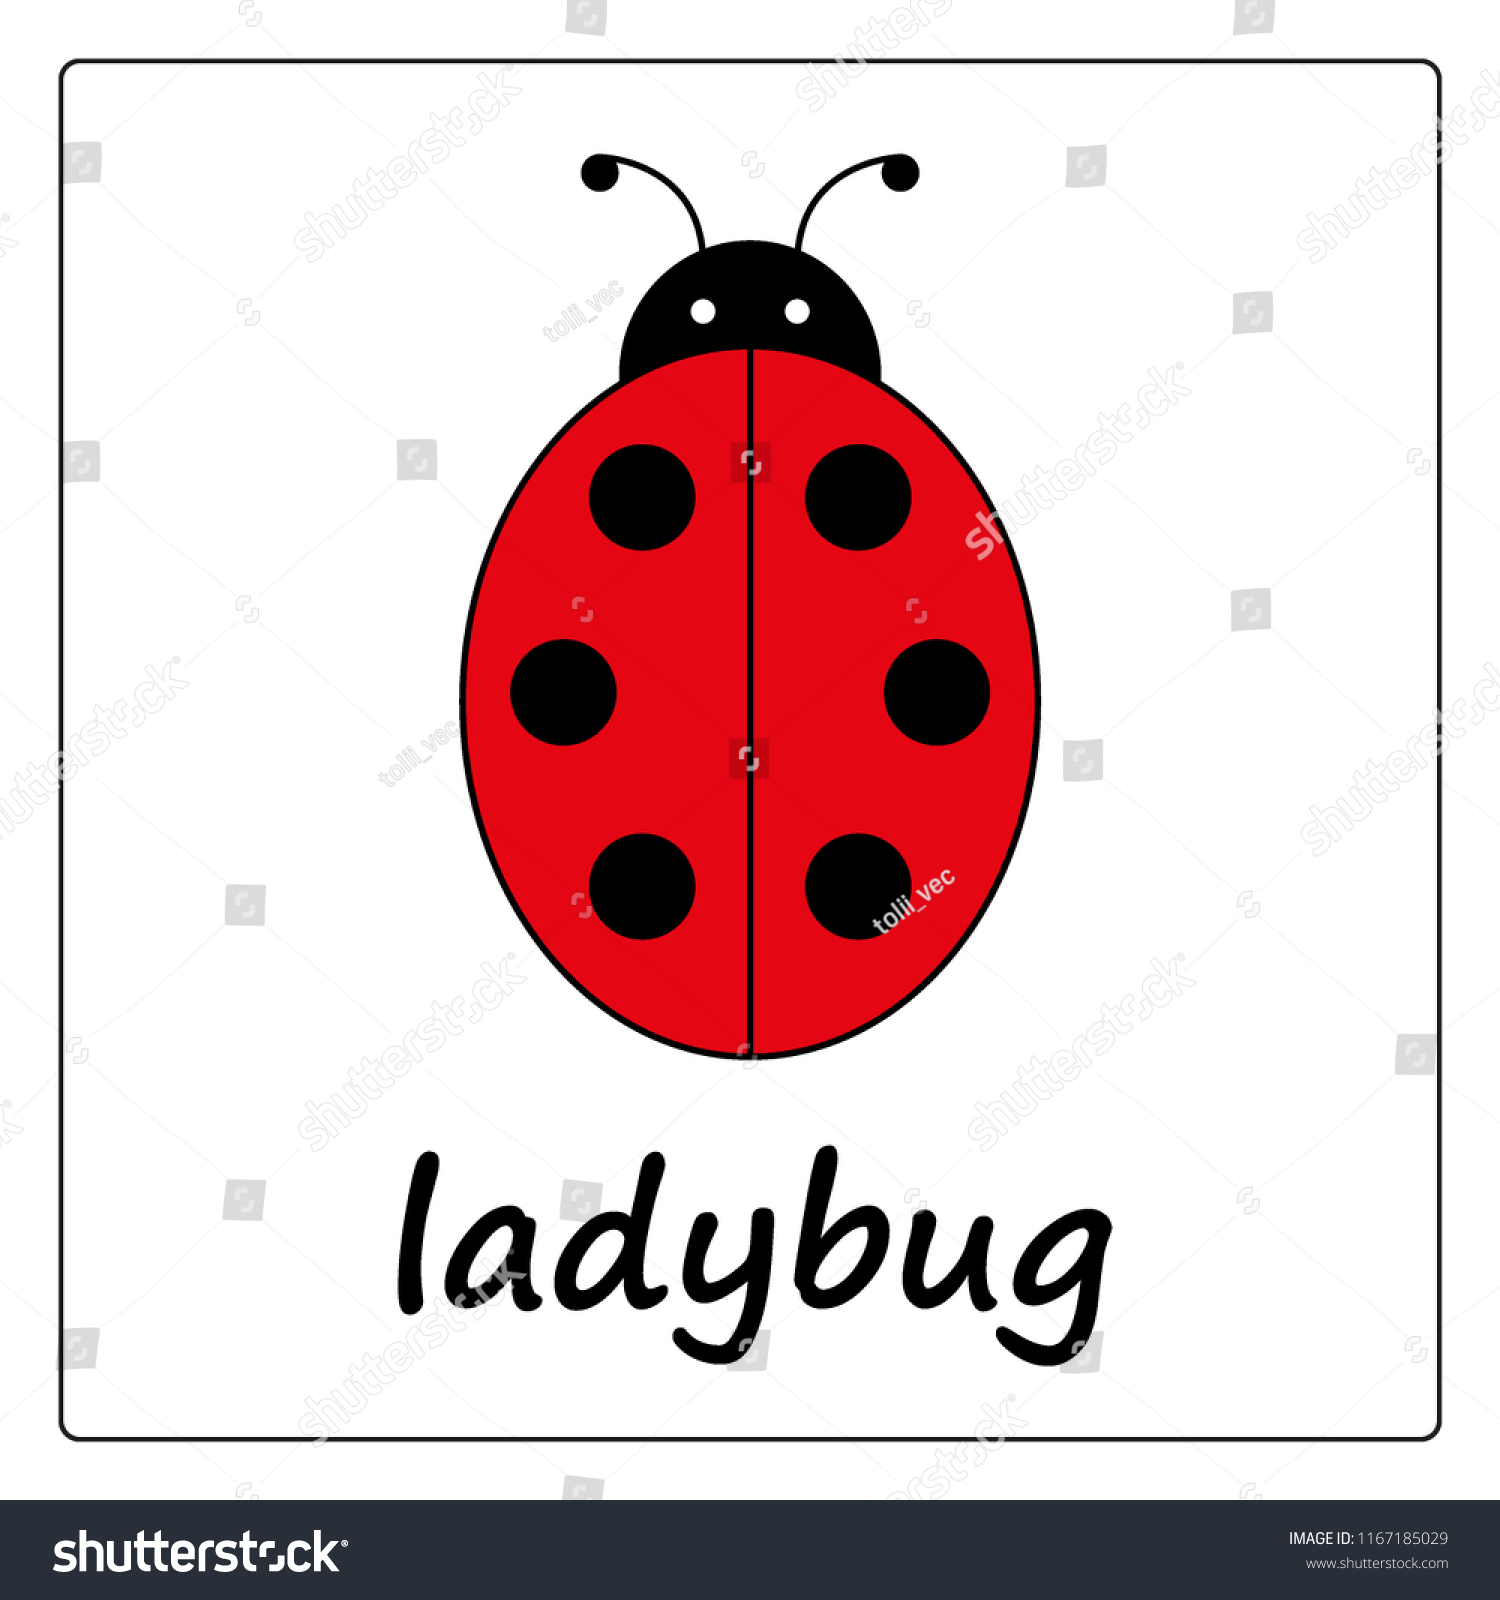 Educational learning activity for children 23 Ladybug themed Flash Cards New. 